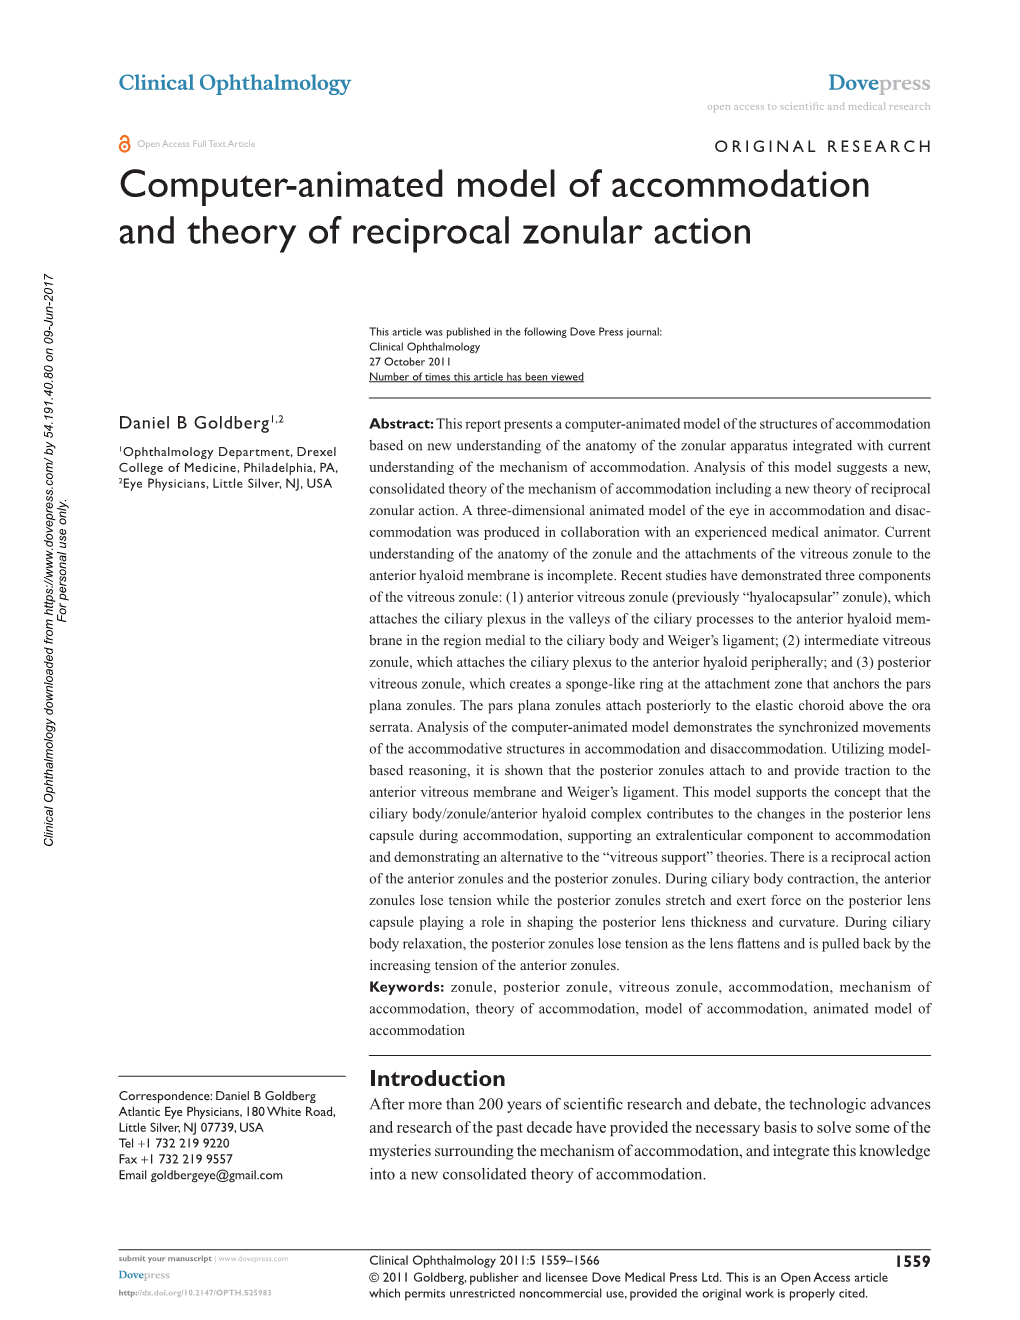 Computer-Animated Model of Accommodation and Theory of Reciprocal Zonular Action